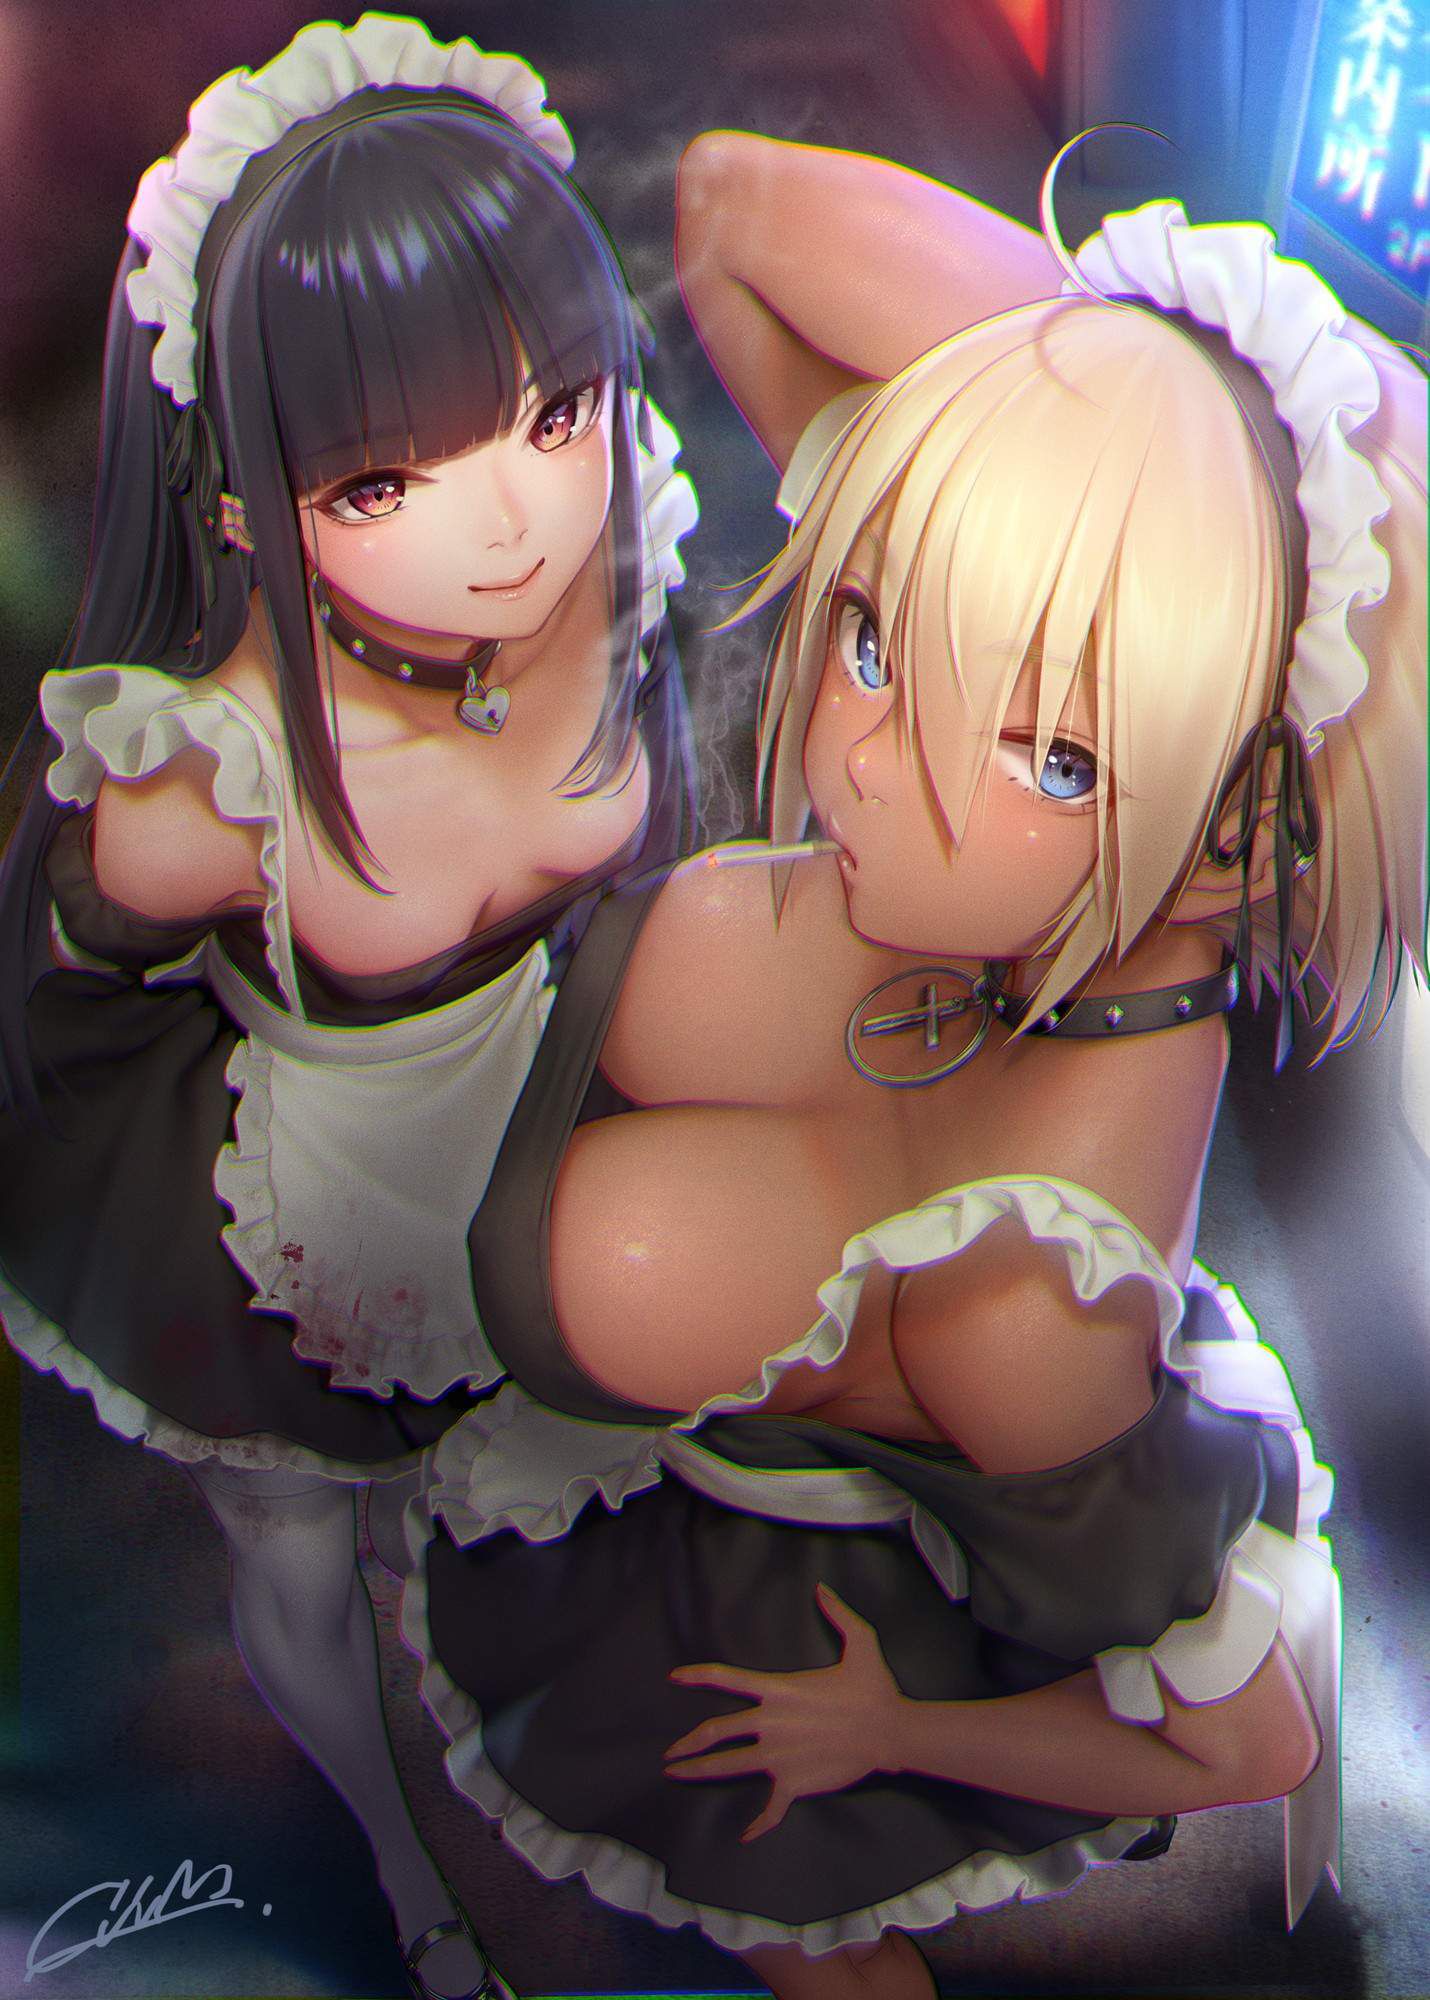 Please take the erotic image of the maid too! 8